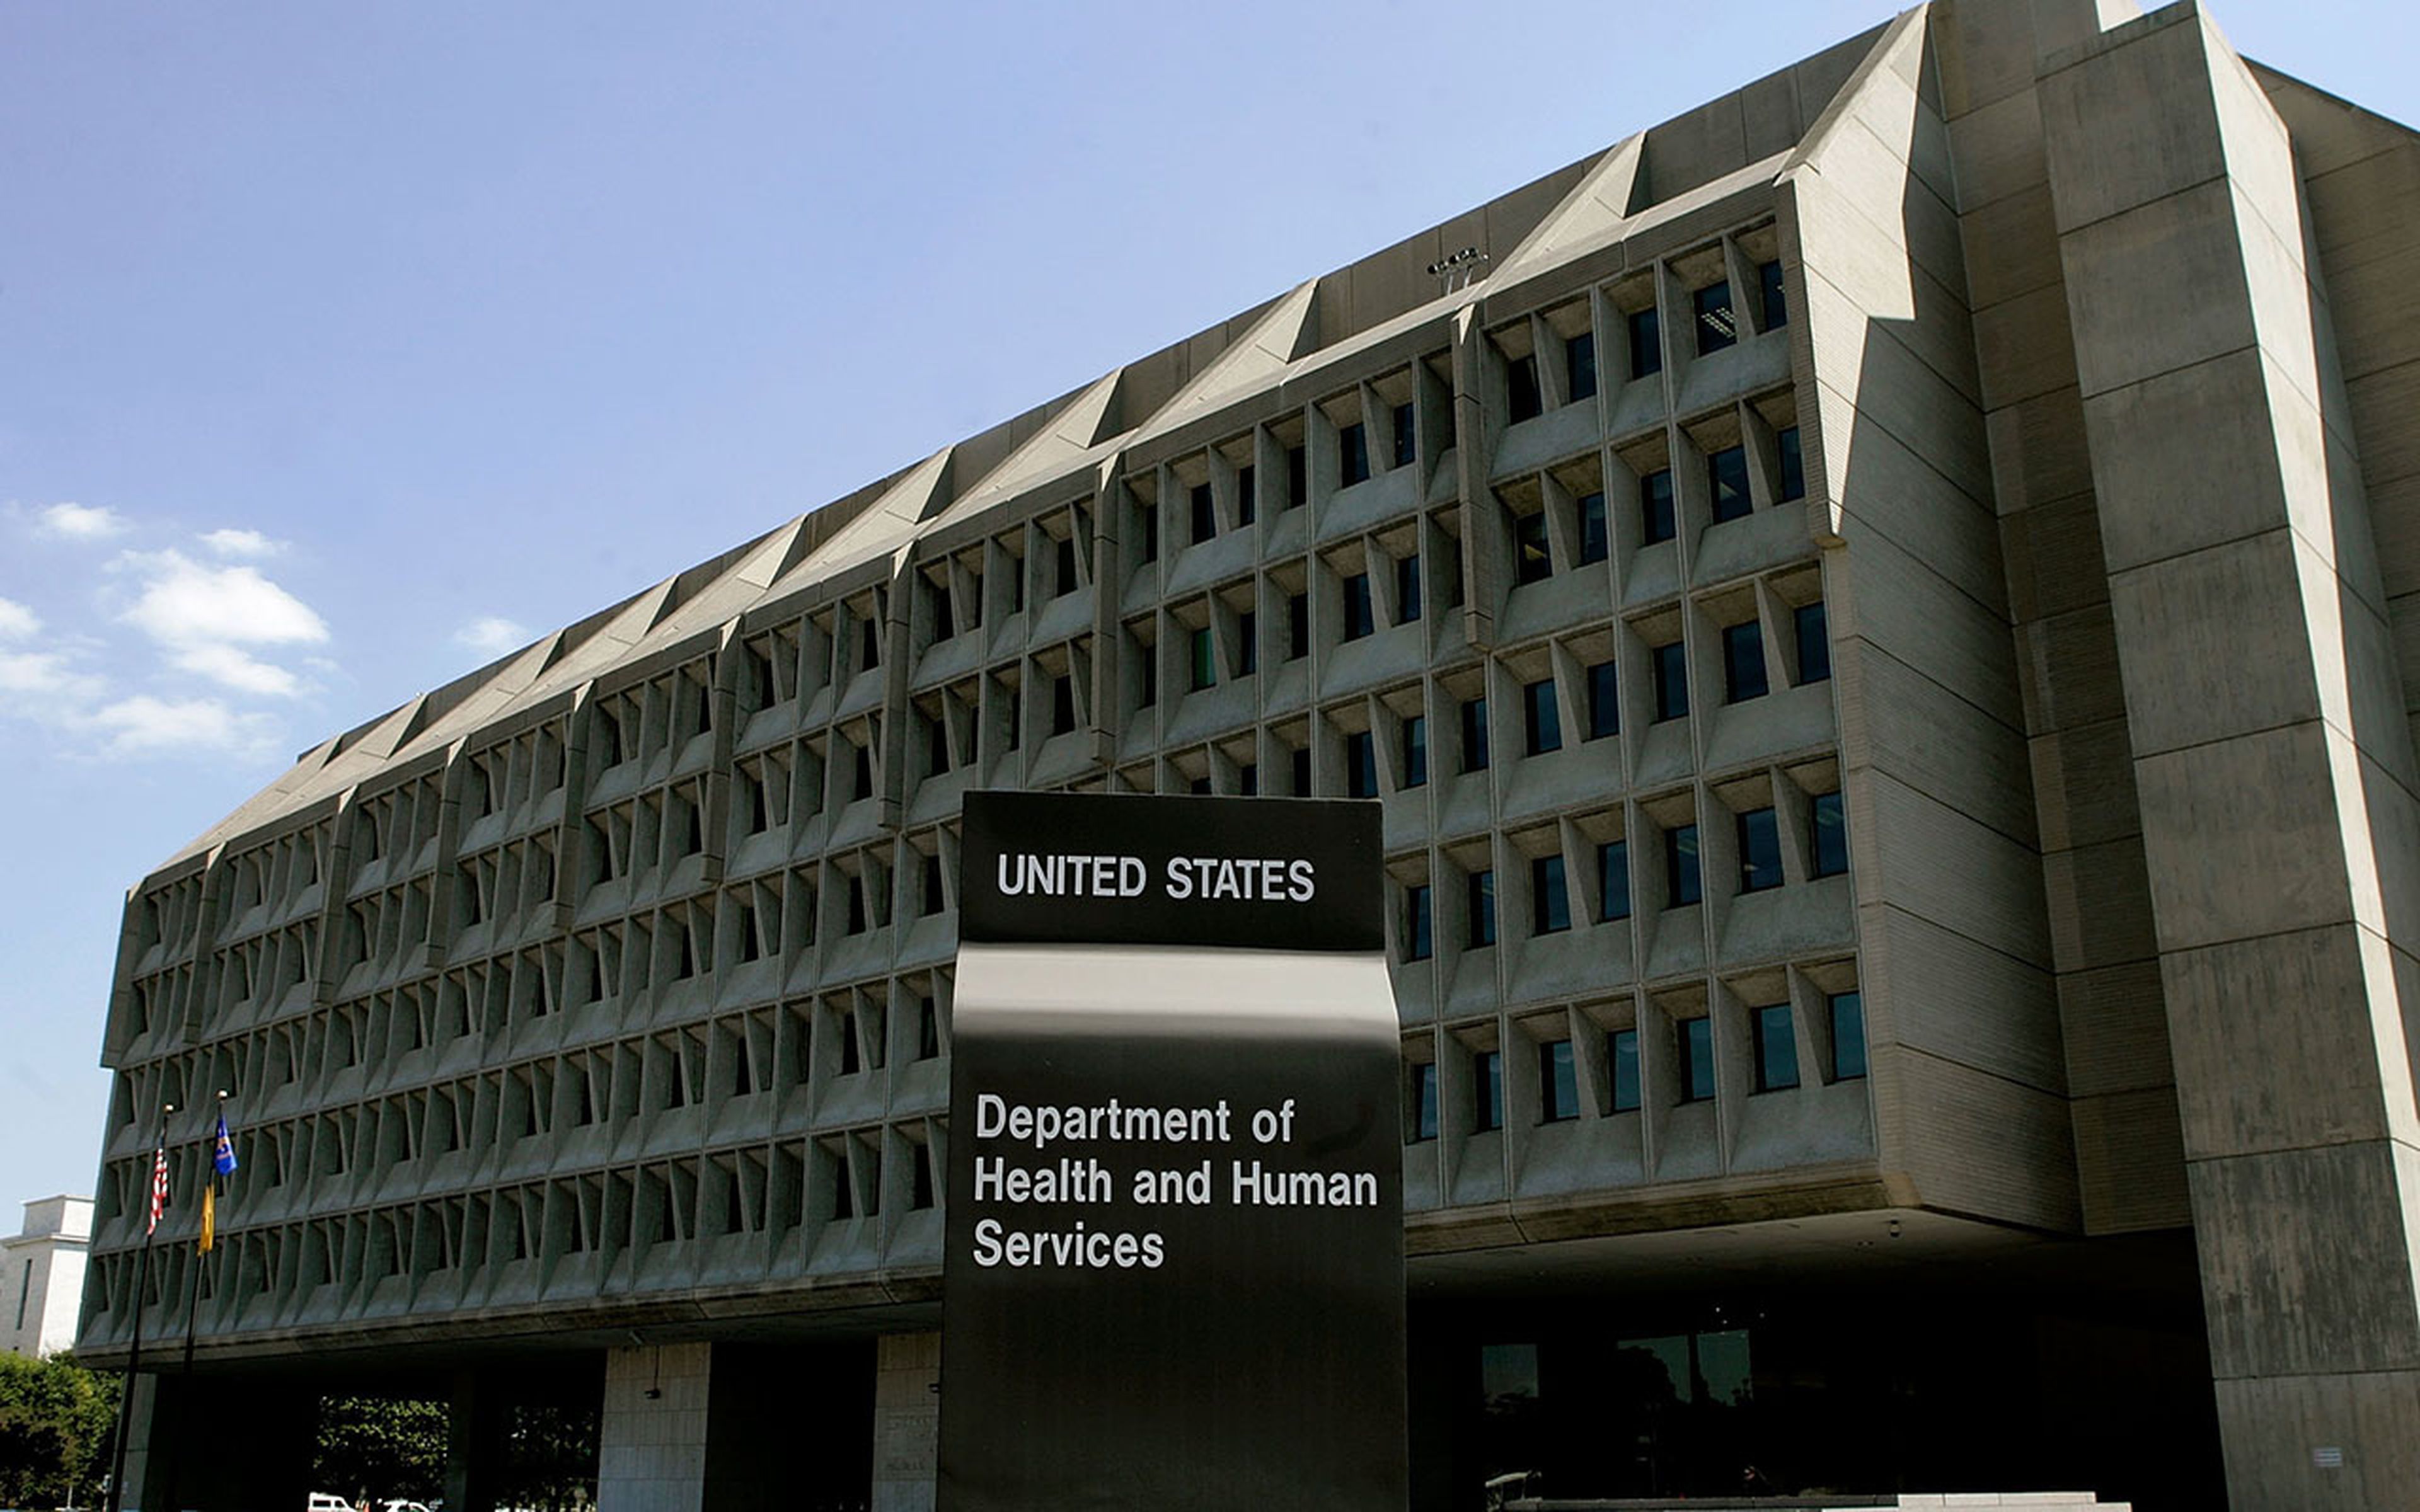 U.S. Department of Health and Human Services building